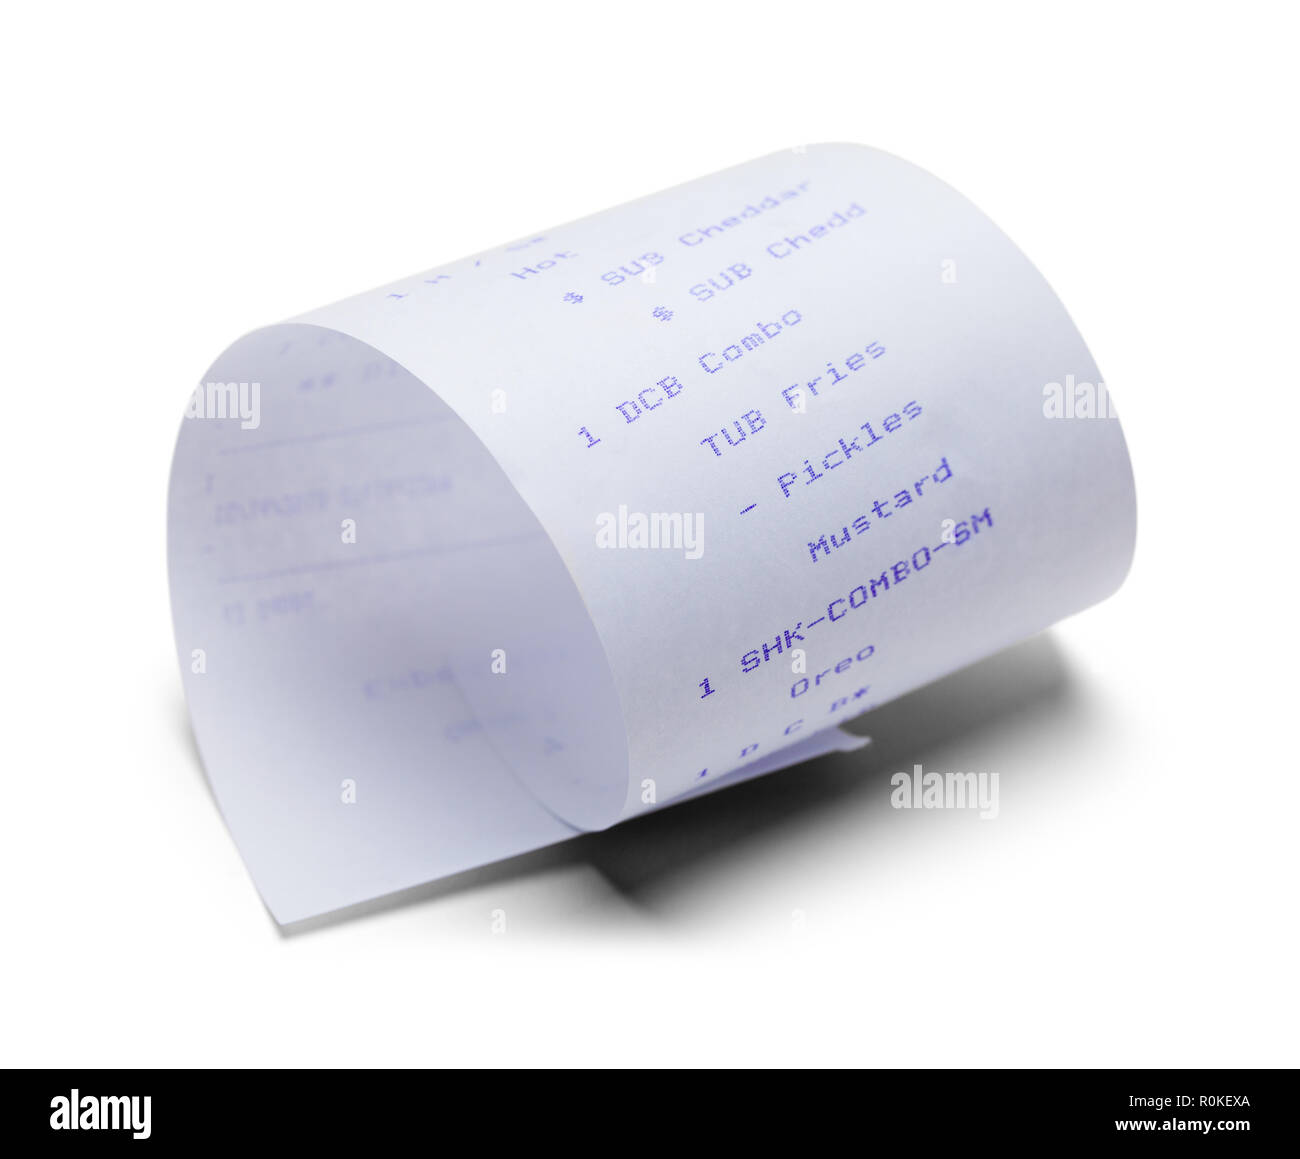 Curled Fast Food Receipt Isolated on a White Background. Stock Photo